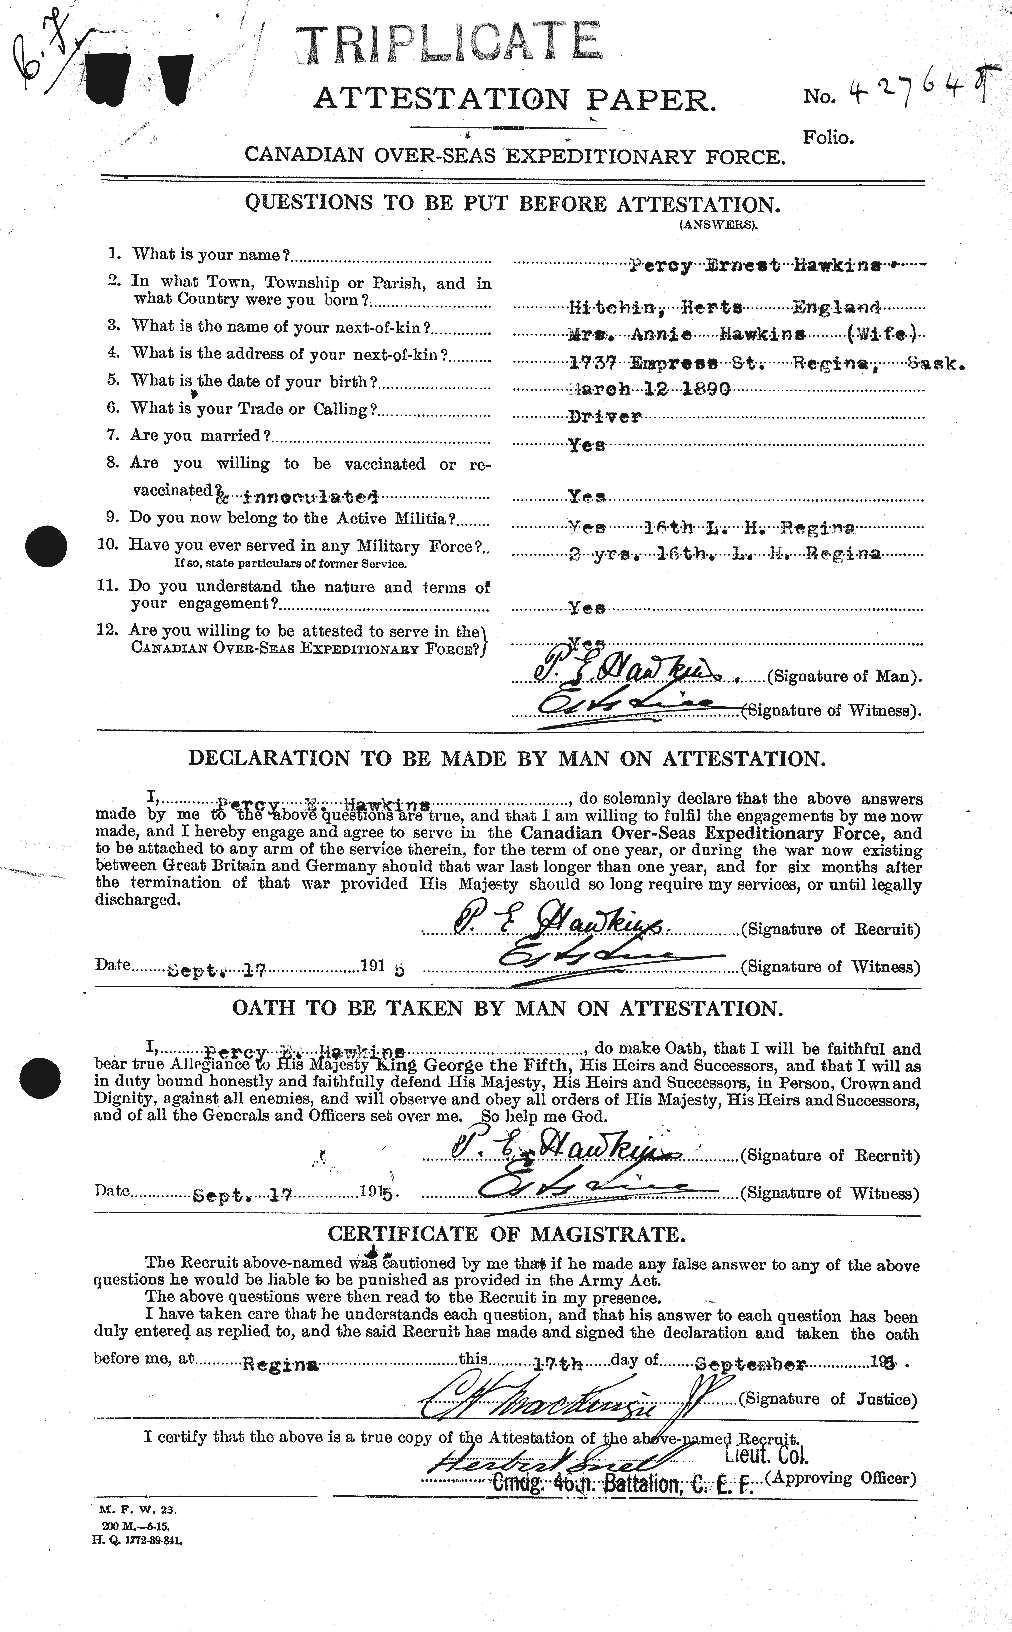 Personnel Records of the First World War - CEF 387216a